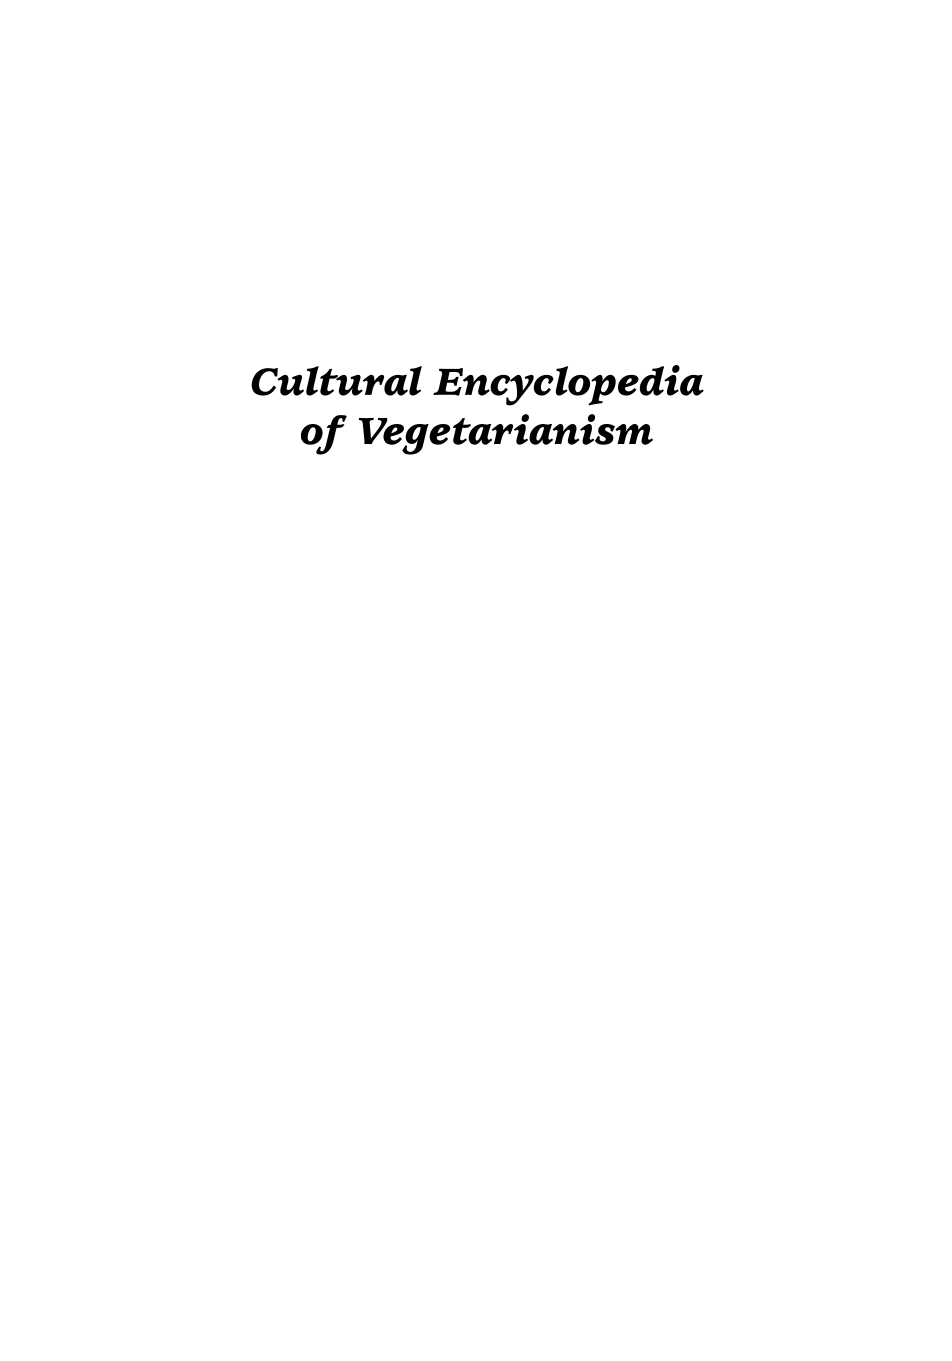 Cultural Encyclopedia of Vegetarianism page i